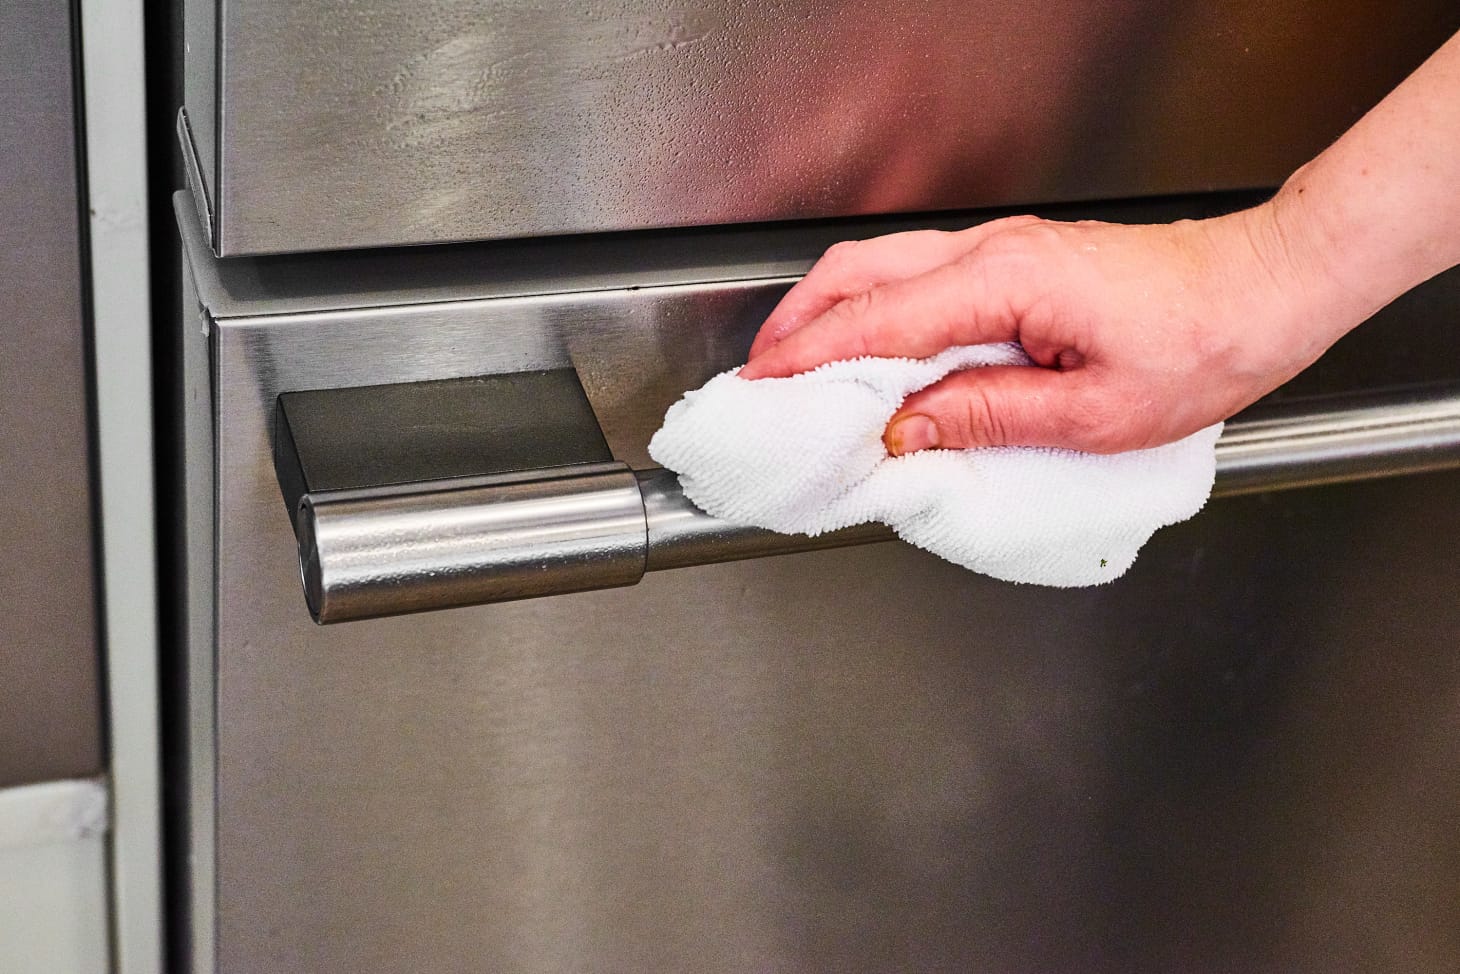 Stainless Steel Appliance Cleaning Tips | Kitchn